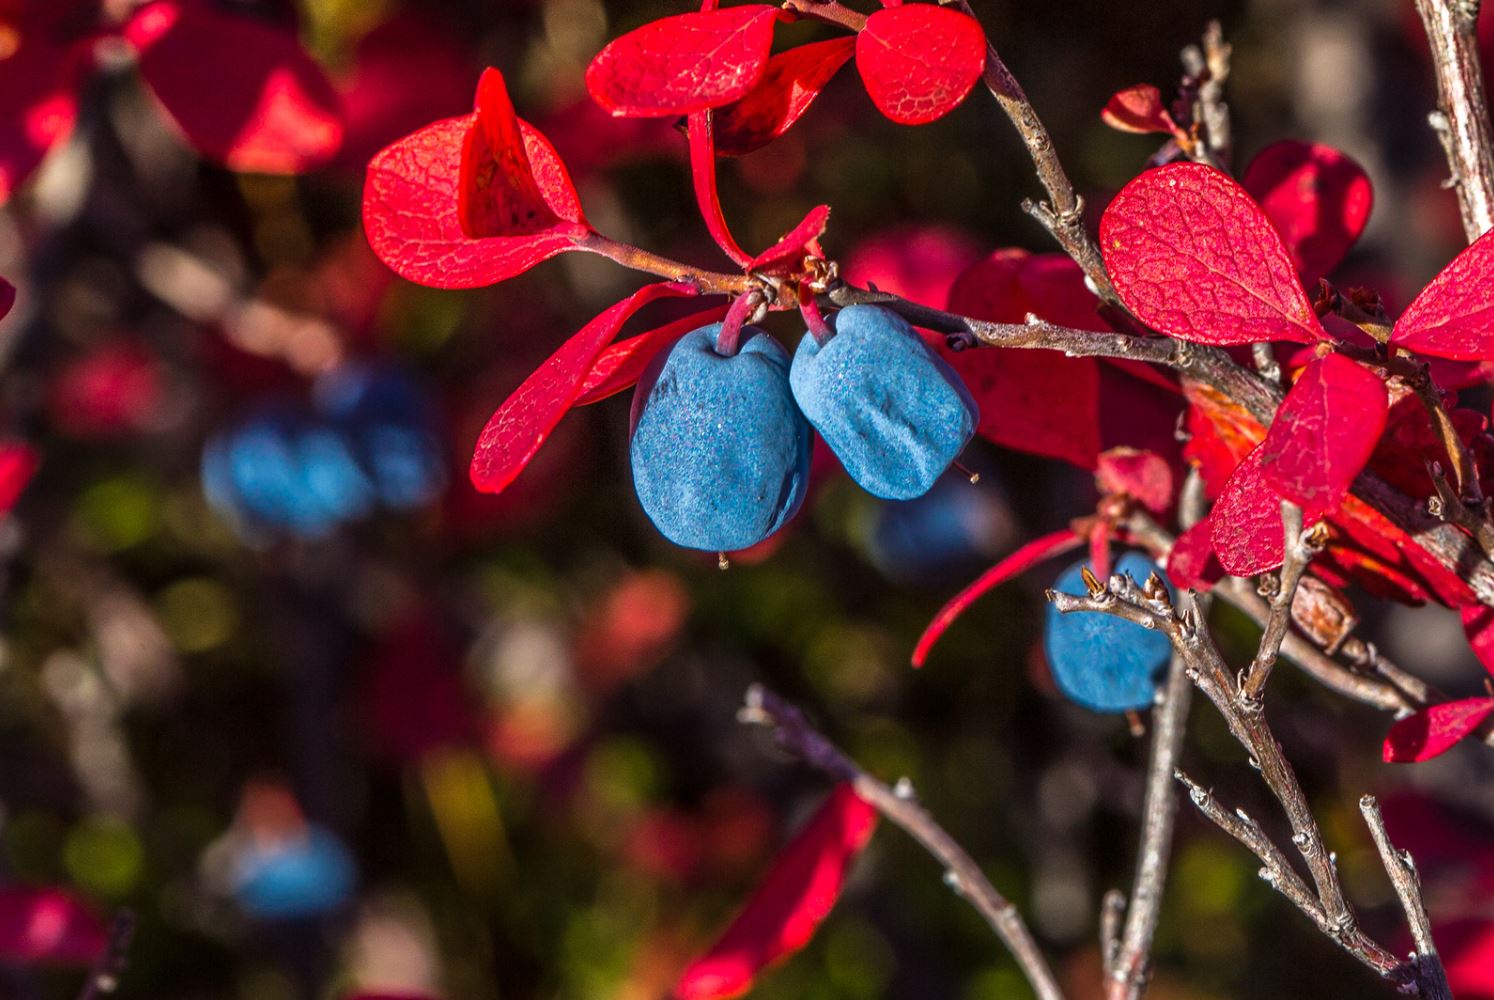 Alaskan  blueberries in the fall colored foliage | UAF Photo